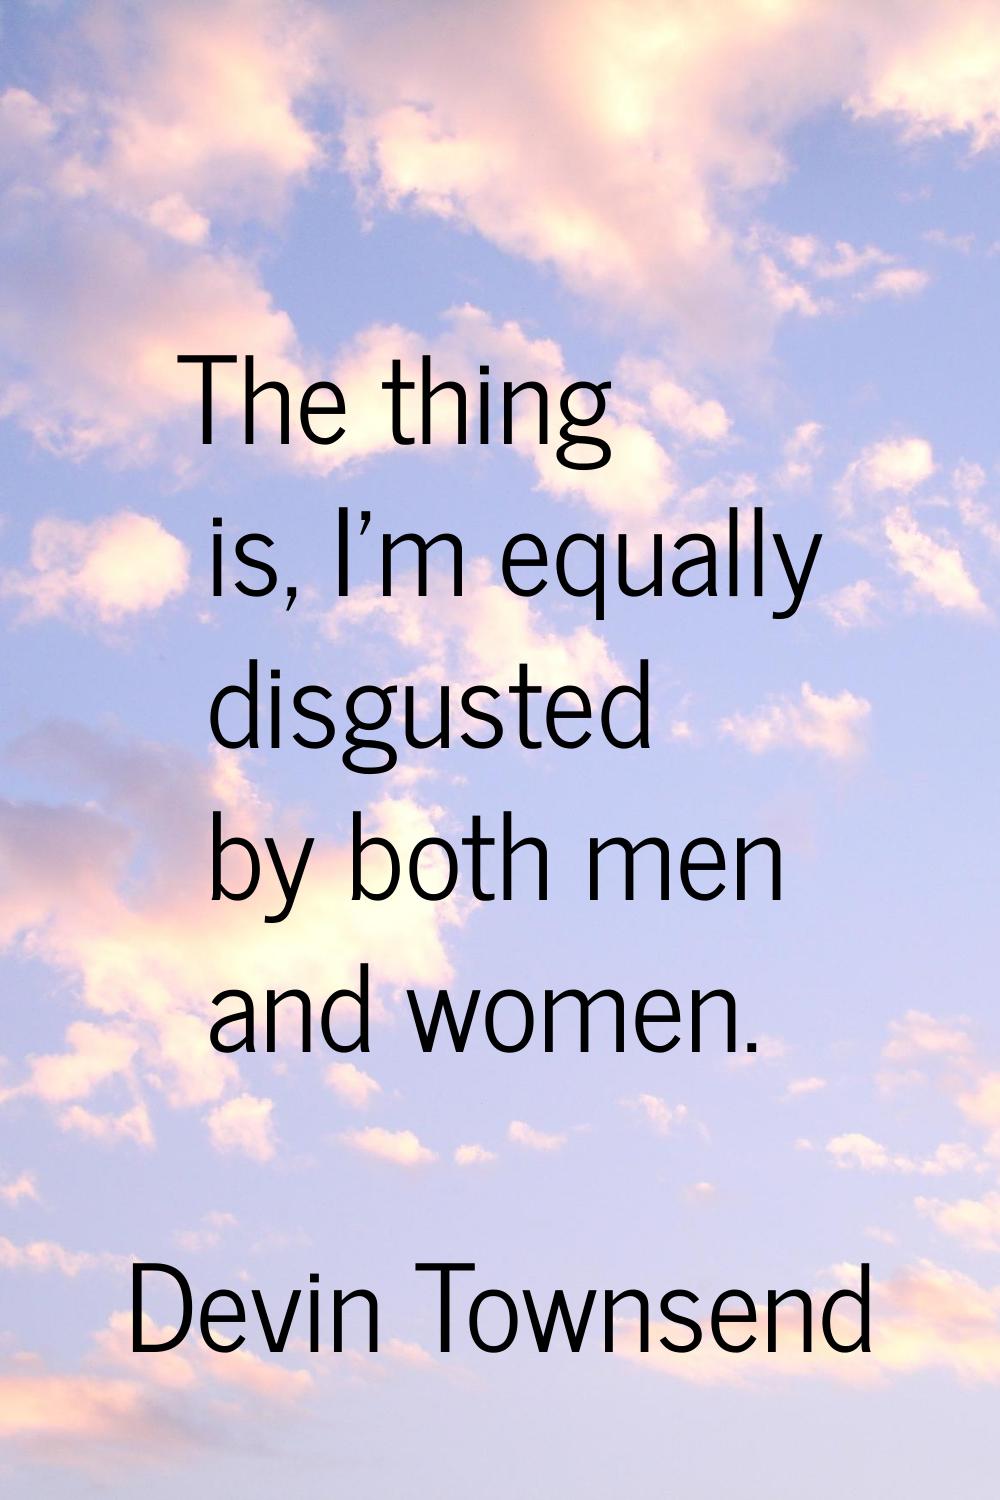 The thing is, I'm equally disgusted by both men and women.